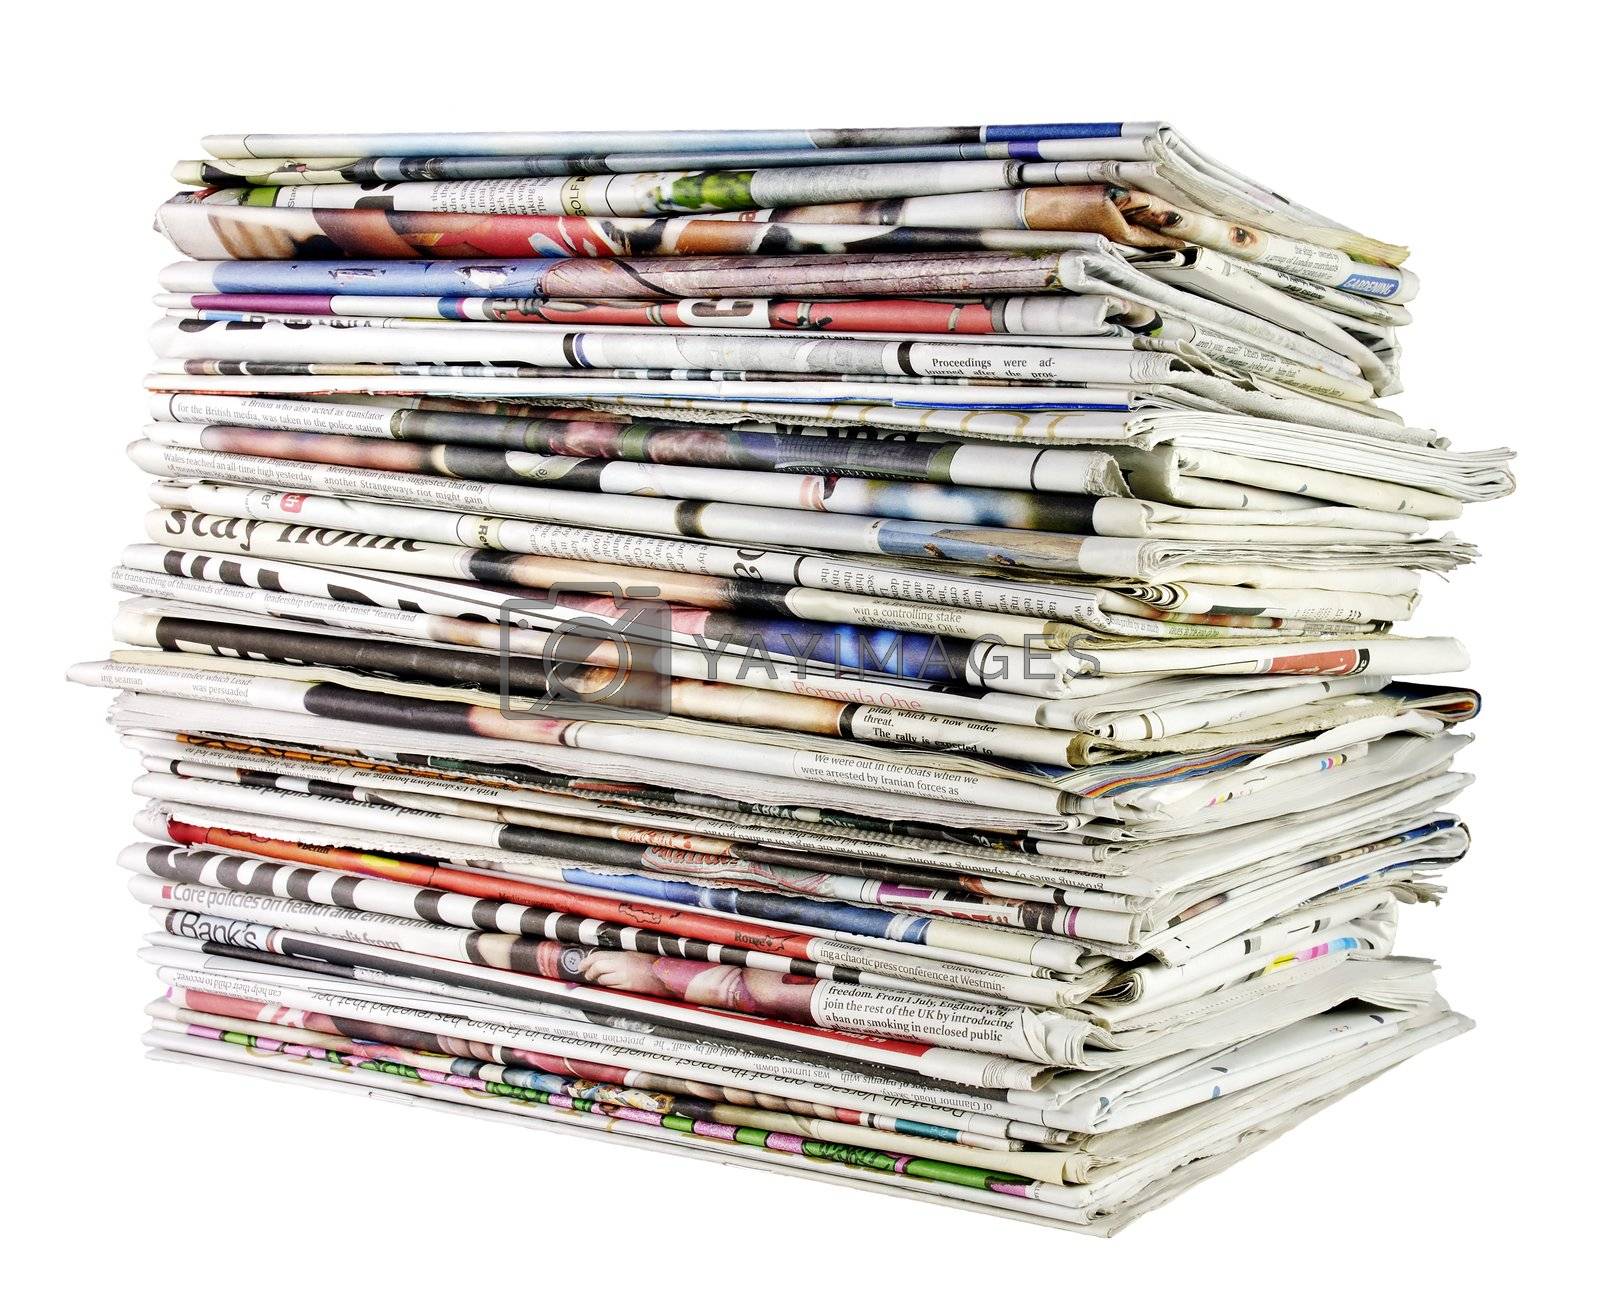 Royalty free image of stack of newspapers 02 by massman